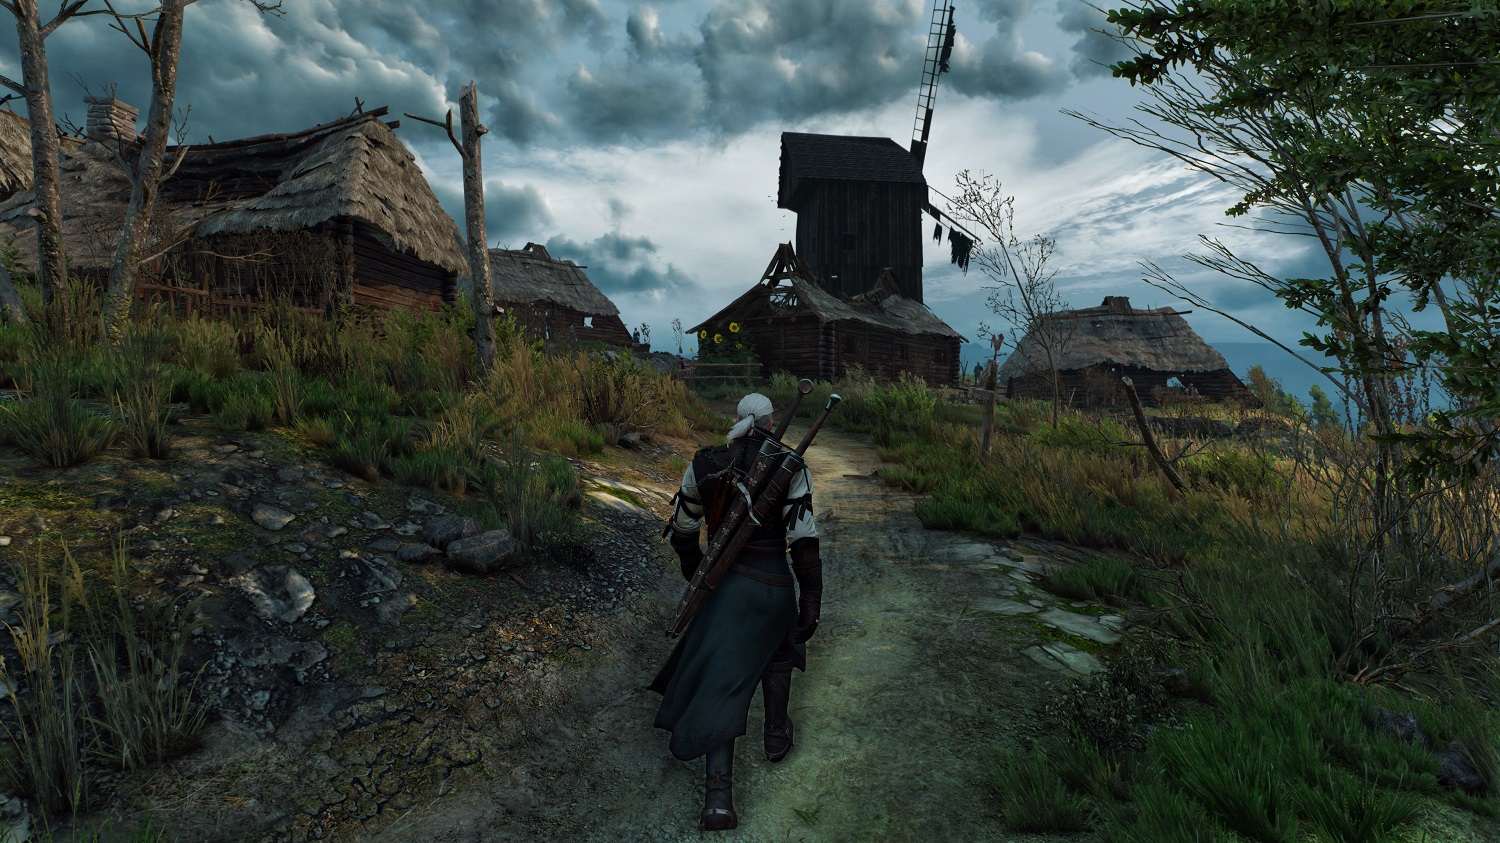 The_Witcher_3_Wild_Hunt_War_ravaged_these_lands,_nobody_lives_here_anymore